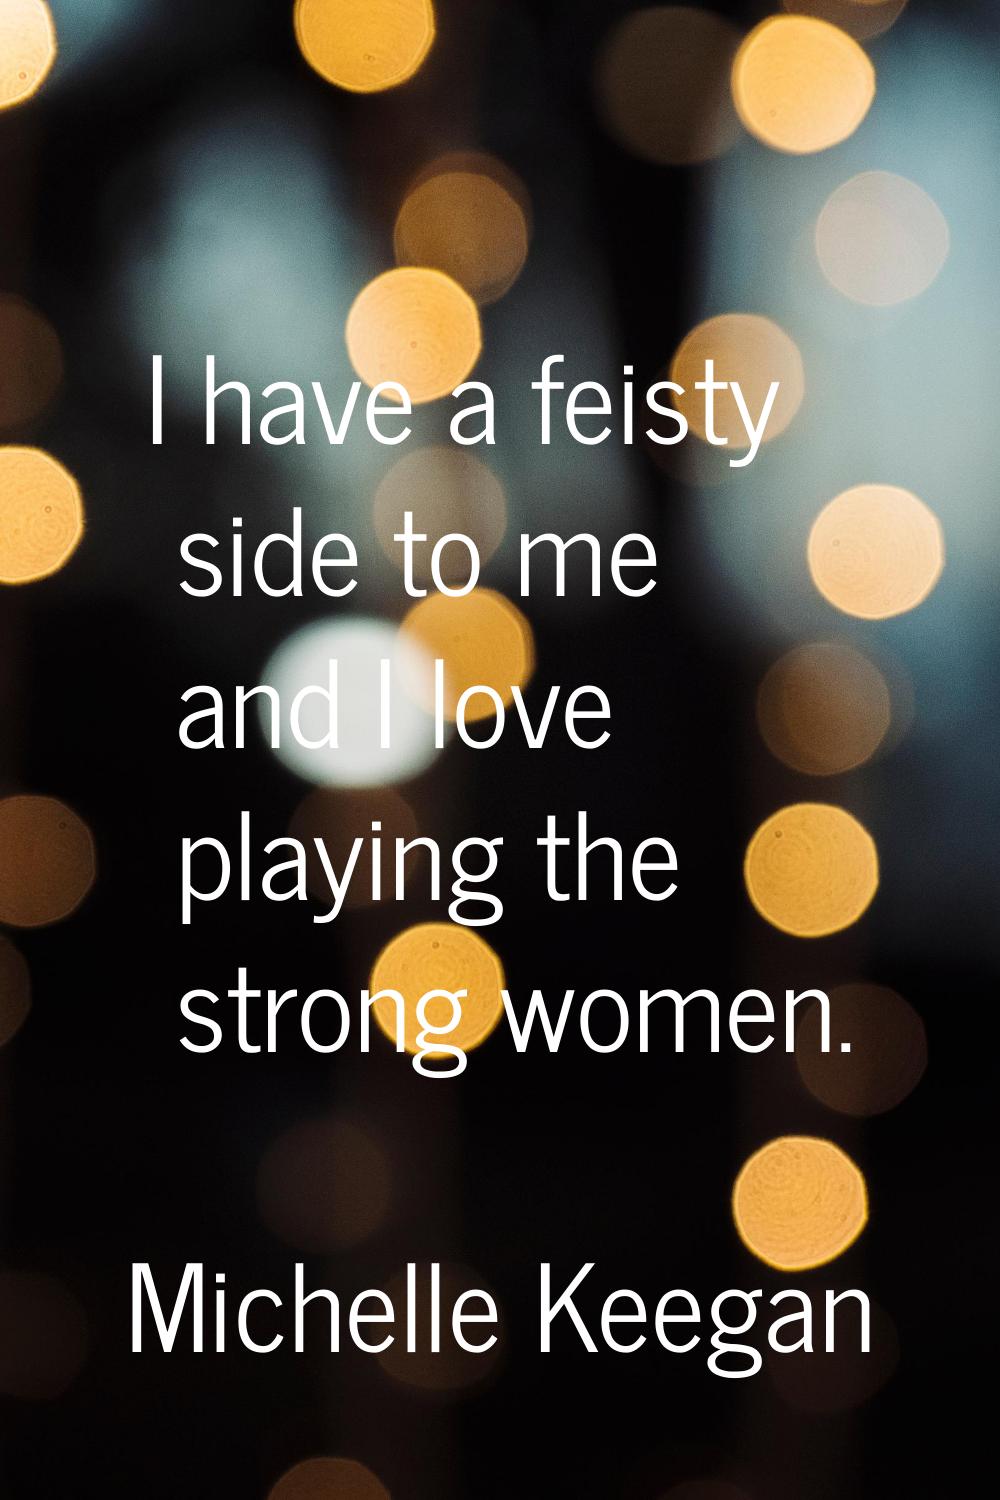 I have a feisty side to me and I love playing the strong women.